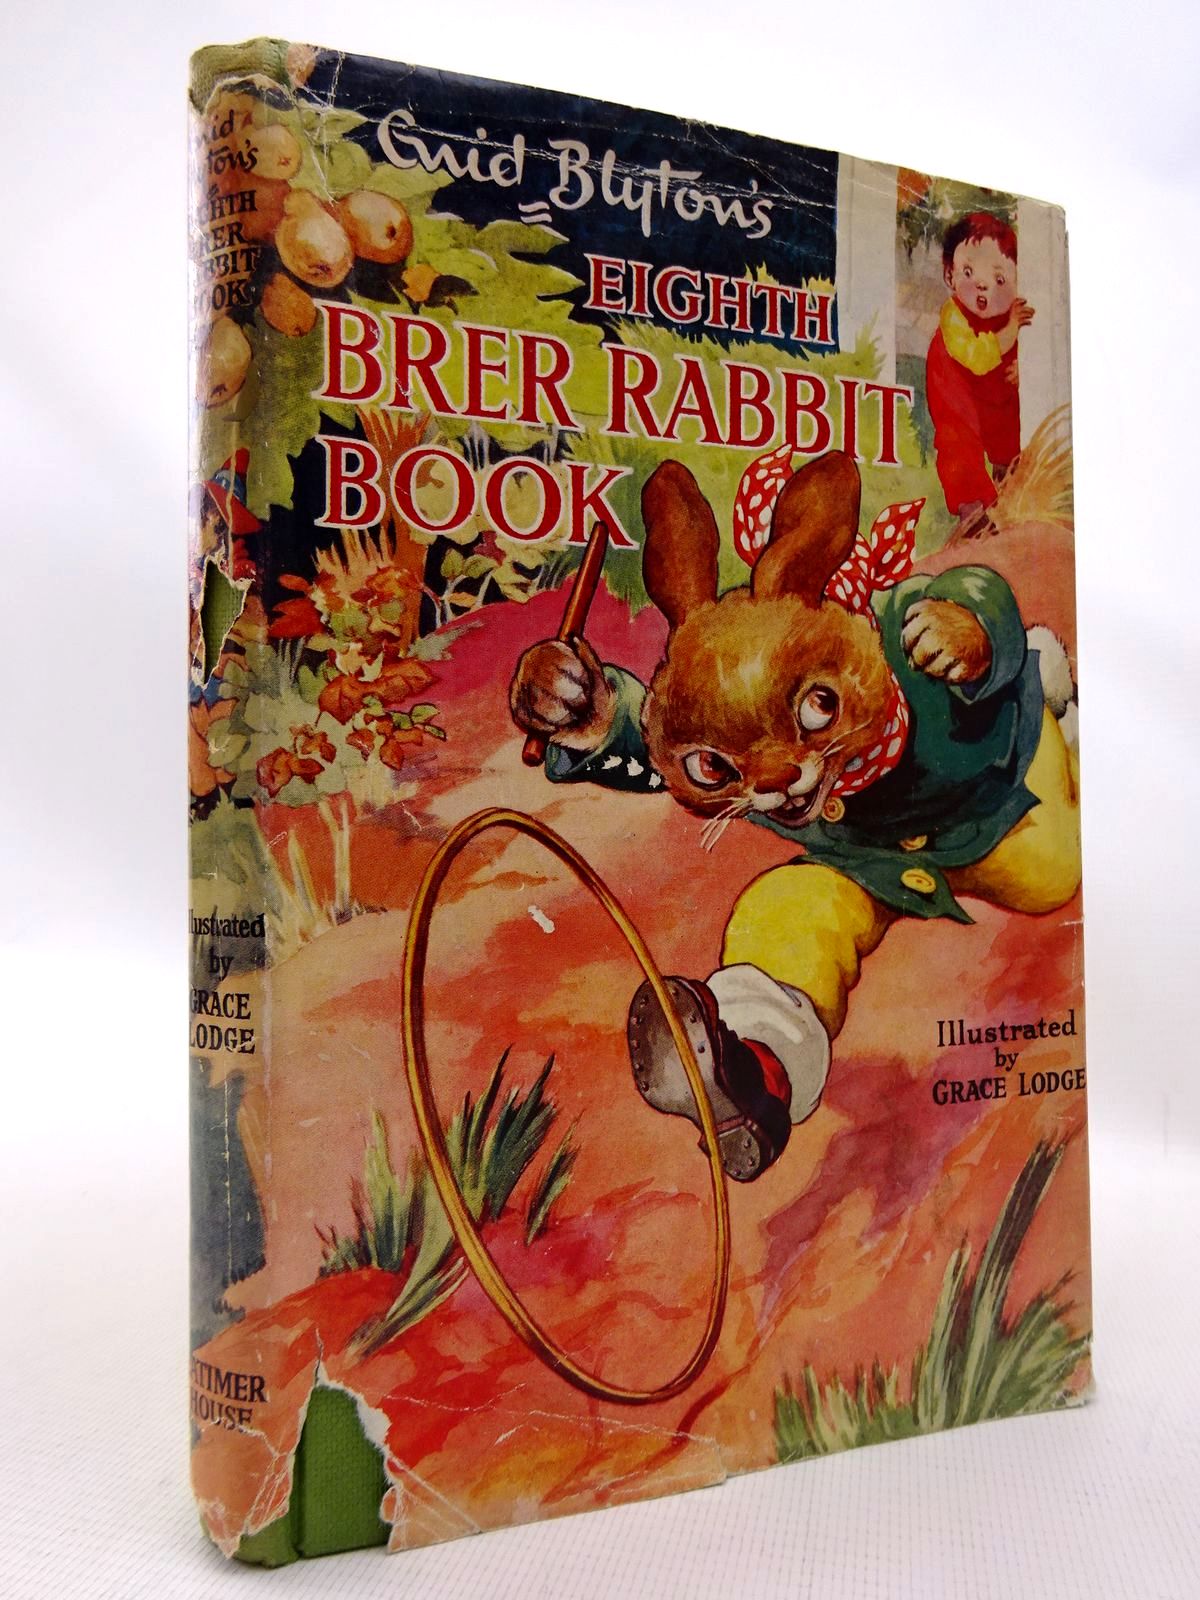 Photo of ENID BLYTON'S EIGHTH BRER RABBIT BOOK written by Blyton, Enid illustrated by Lodge, Grace published by Latimer House Limited (STOCK CODE: 1815820)  for sale by Stella & Rose's Books